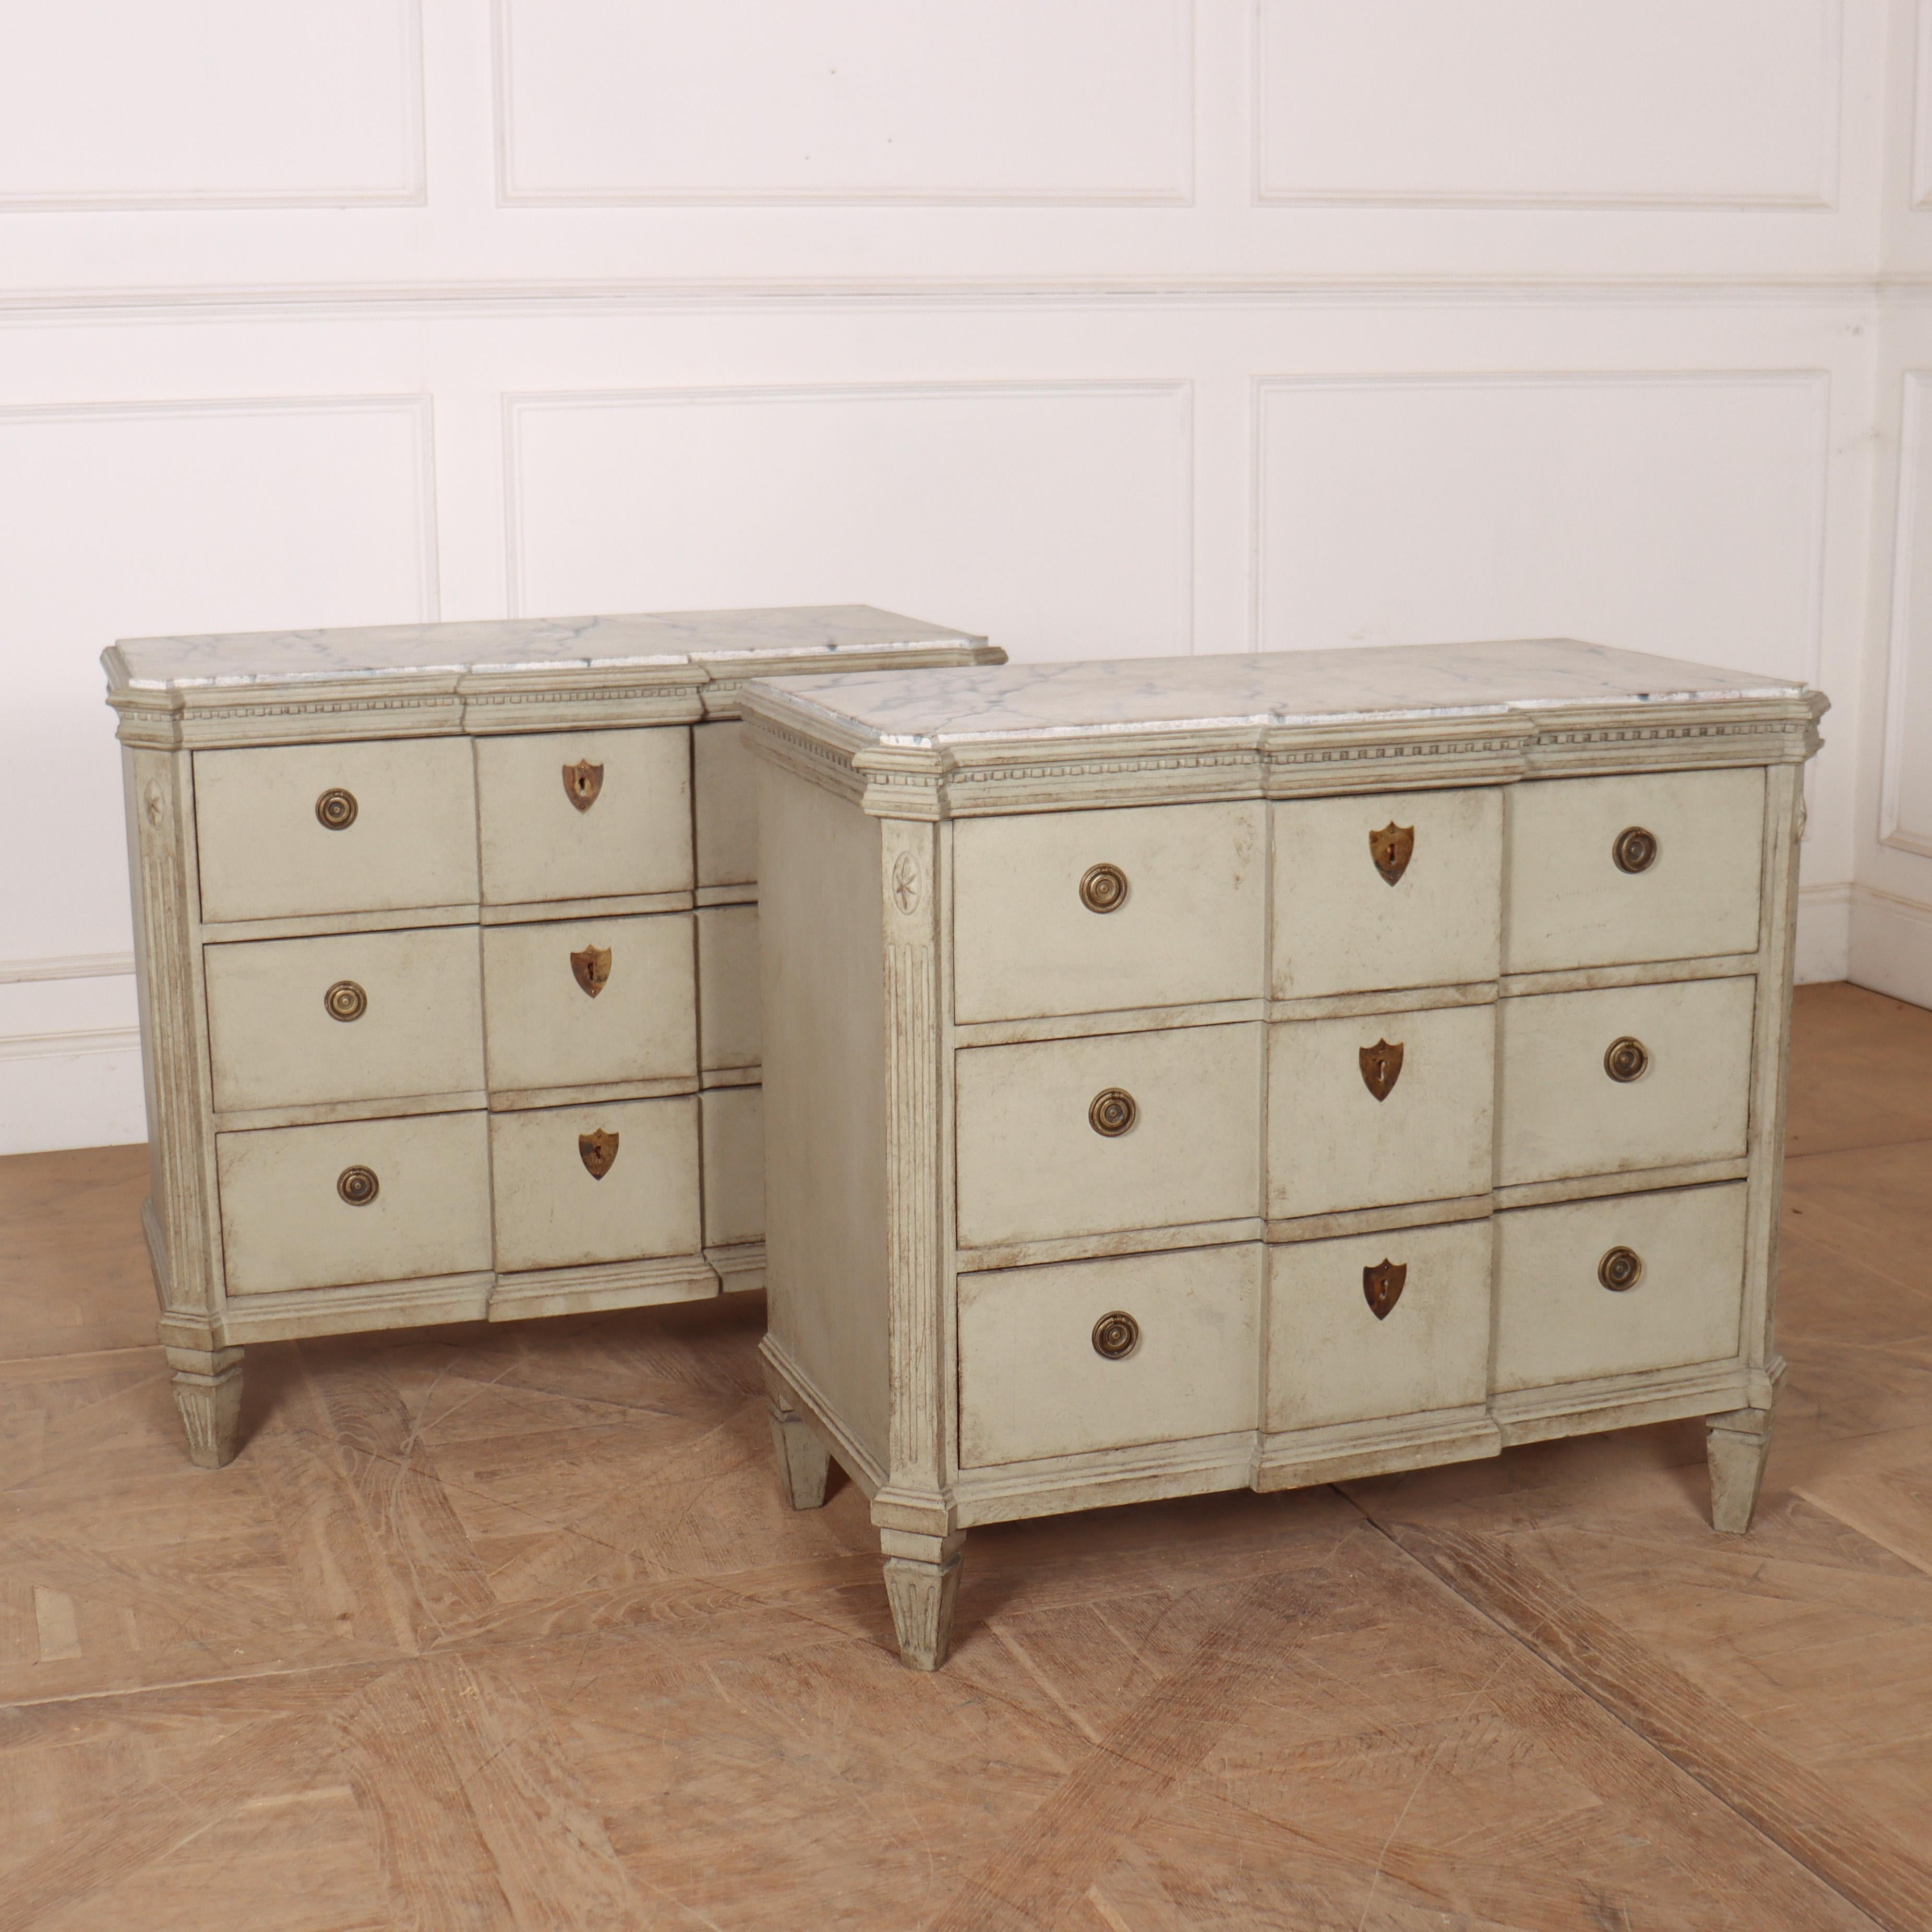 Good pair of 19th C Swedish breakfront commodes with faux marble painted tops. 1880.

Internal reference: JG3

Reference: 8052

Dimensions
36.5 inches (93 cms) Wide
18.5 inches (47 cms) Deep
32 inches (81 cms) High